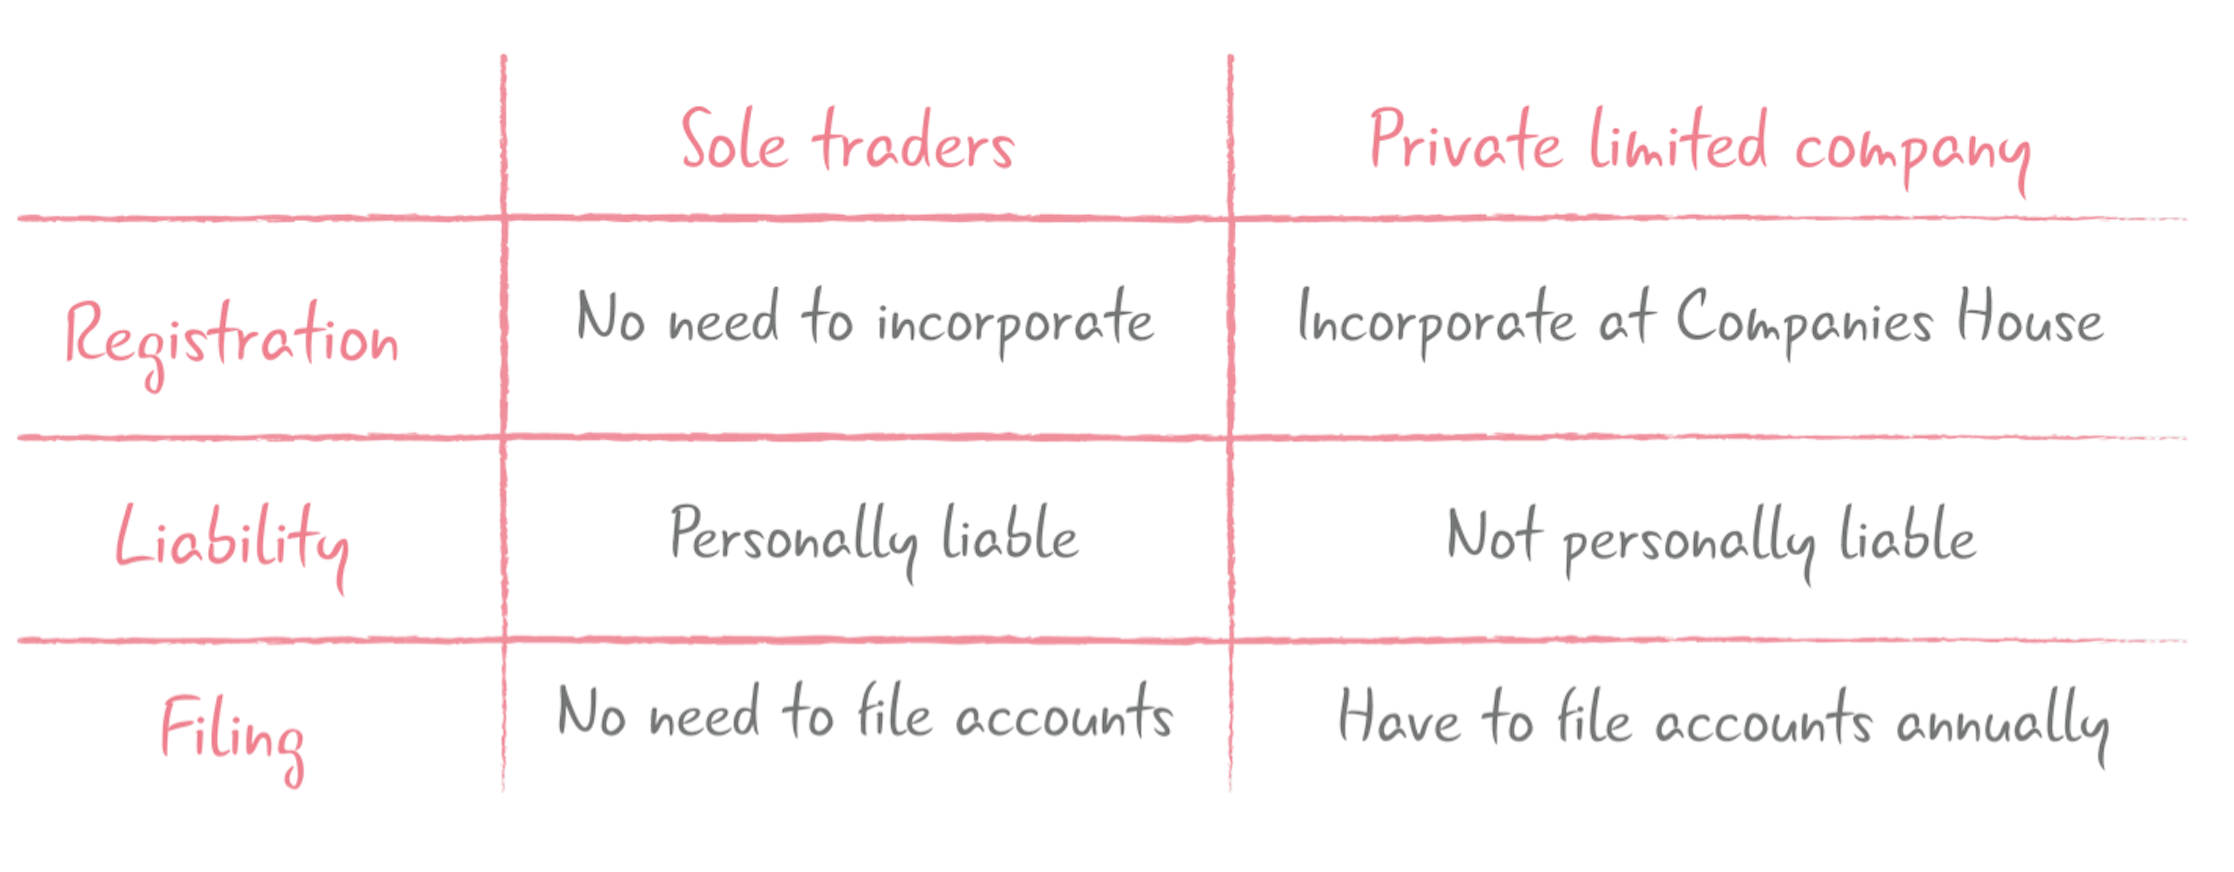 Key differences between a limited company and sole traders 